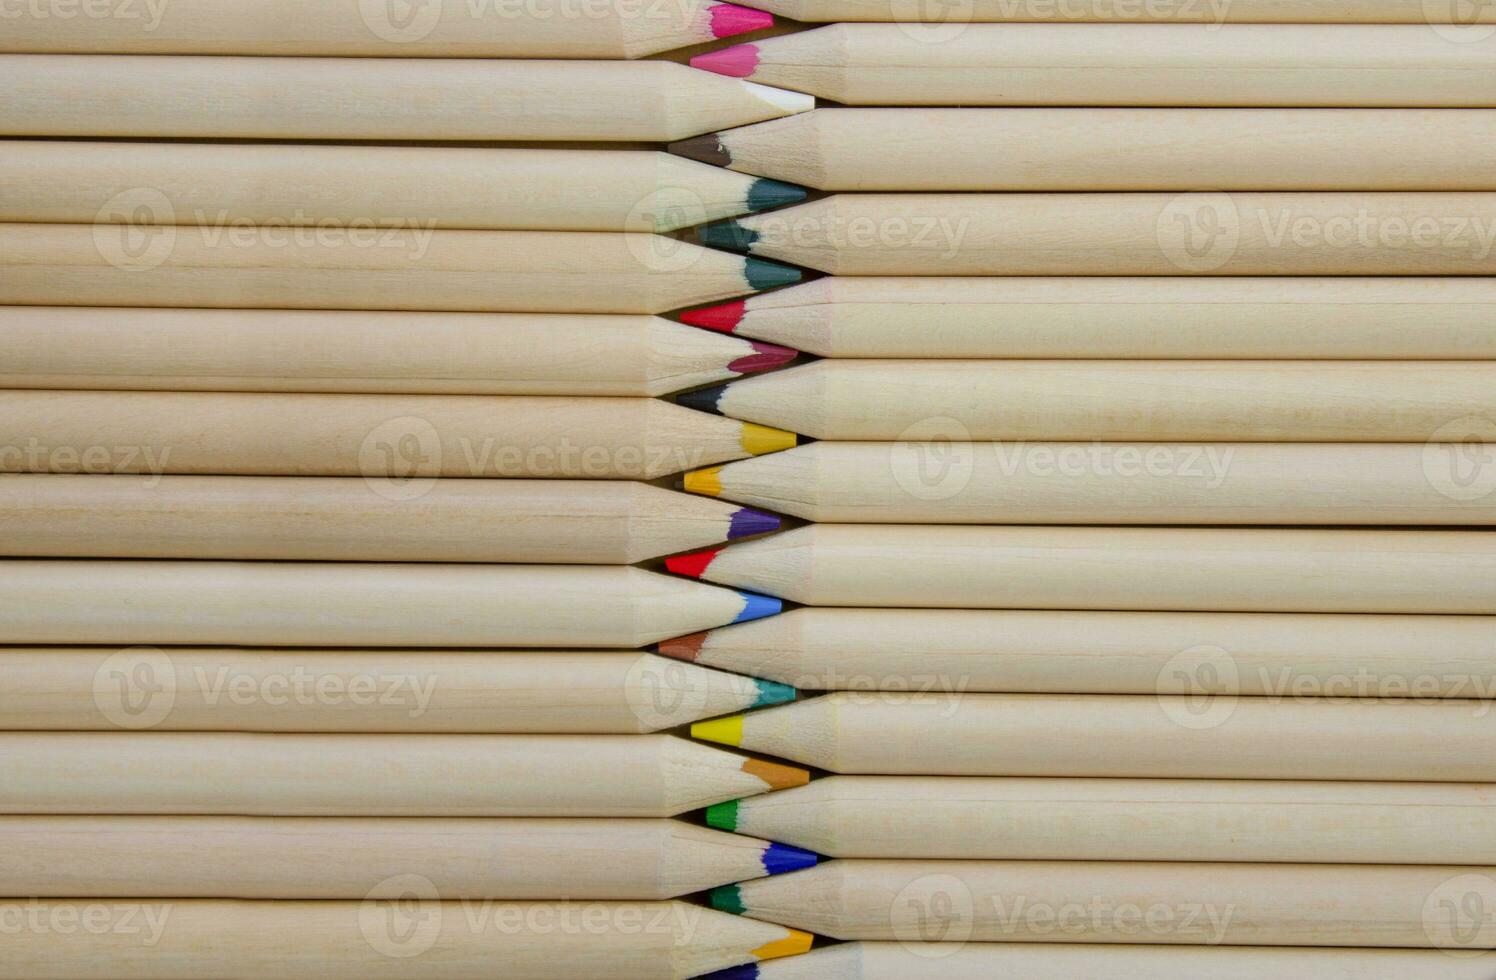 Exactly laid out colored wooden pencils, top view photo